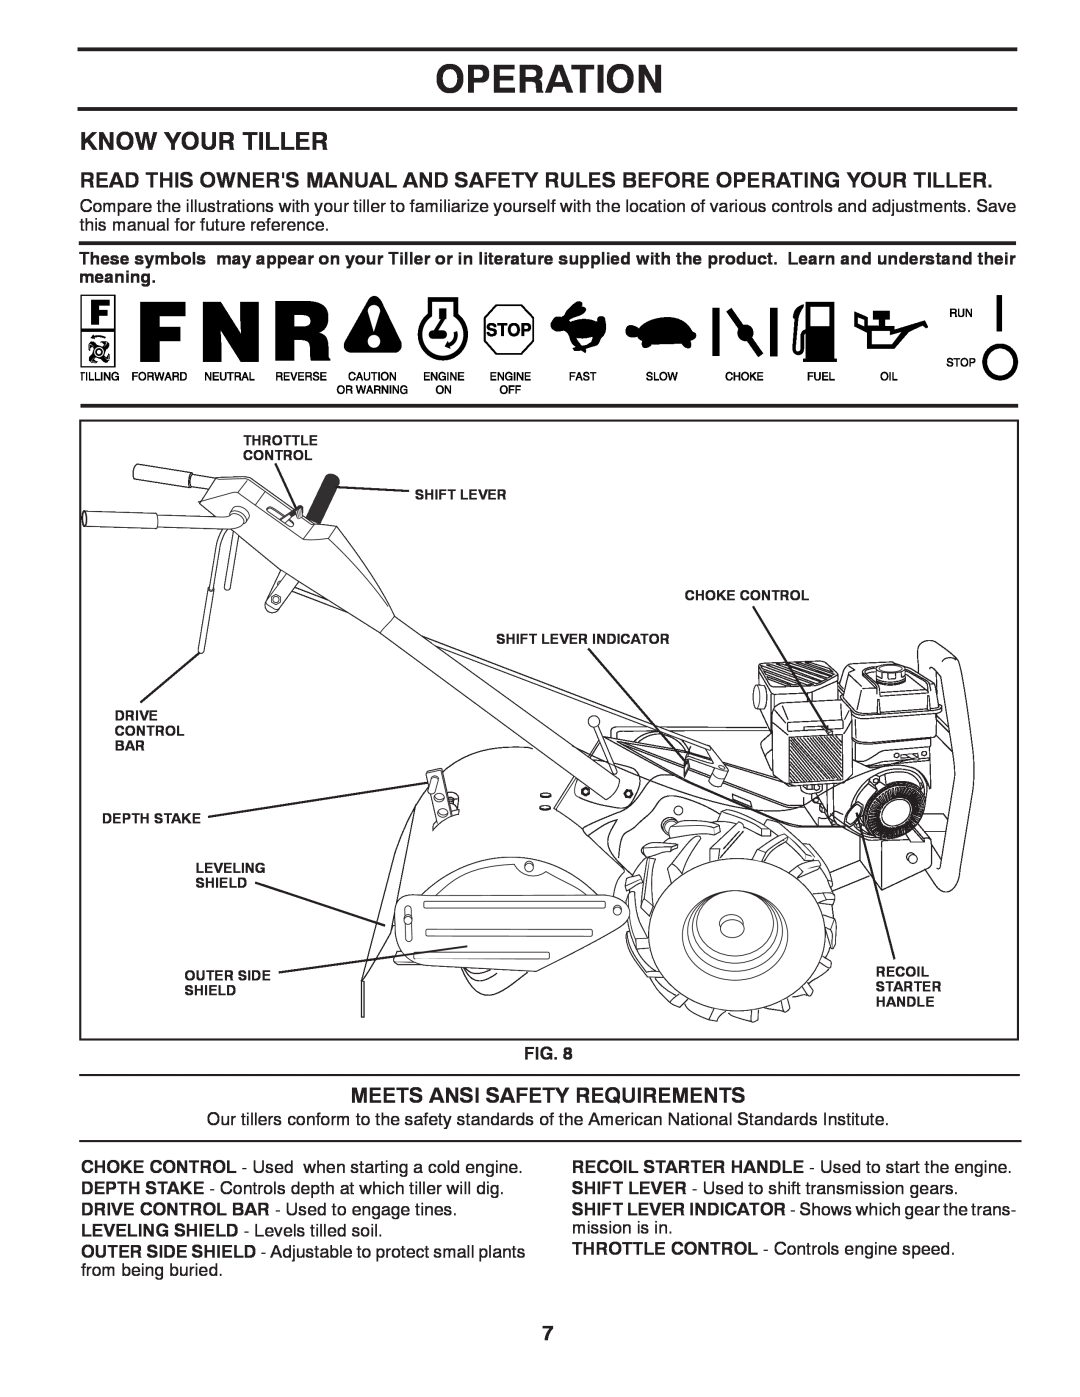 Poulan PRRT850 manual Operation, Know Your Tiller, Meets Ansi Safety Requirements 